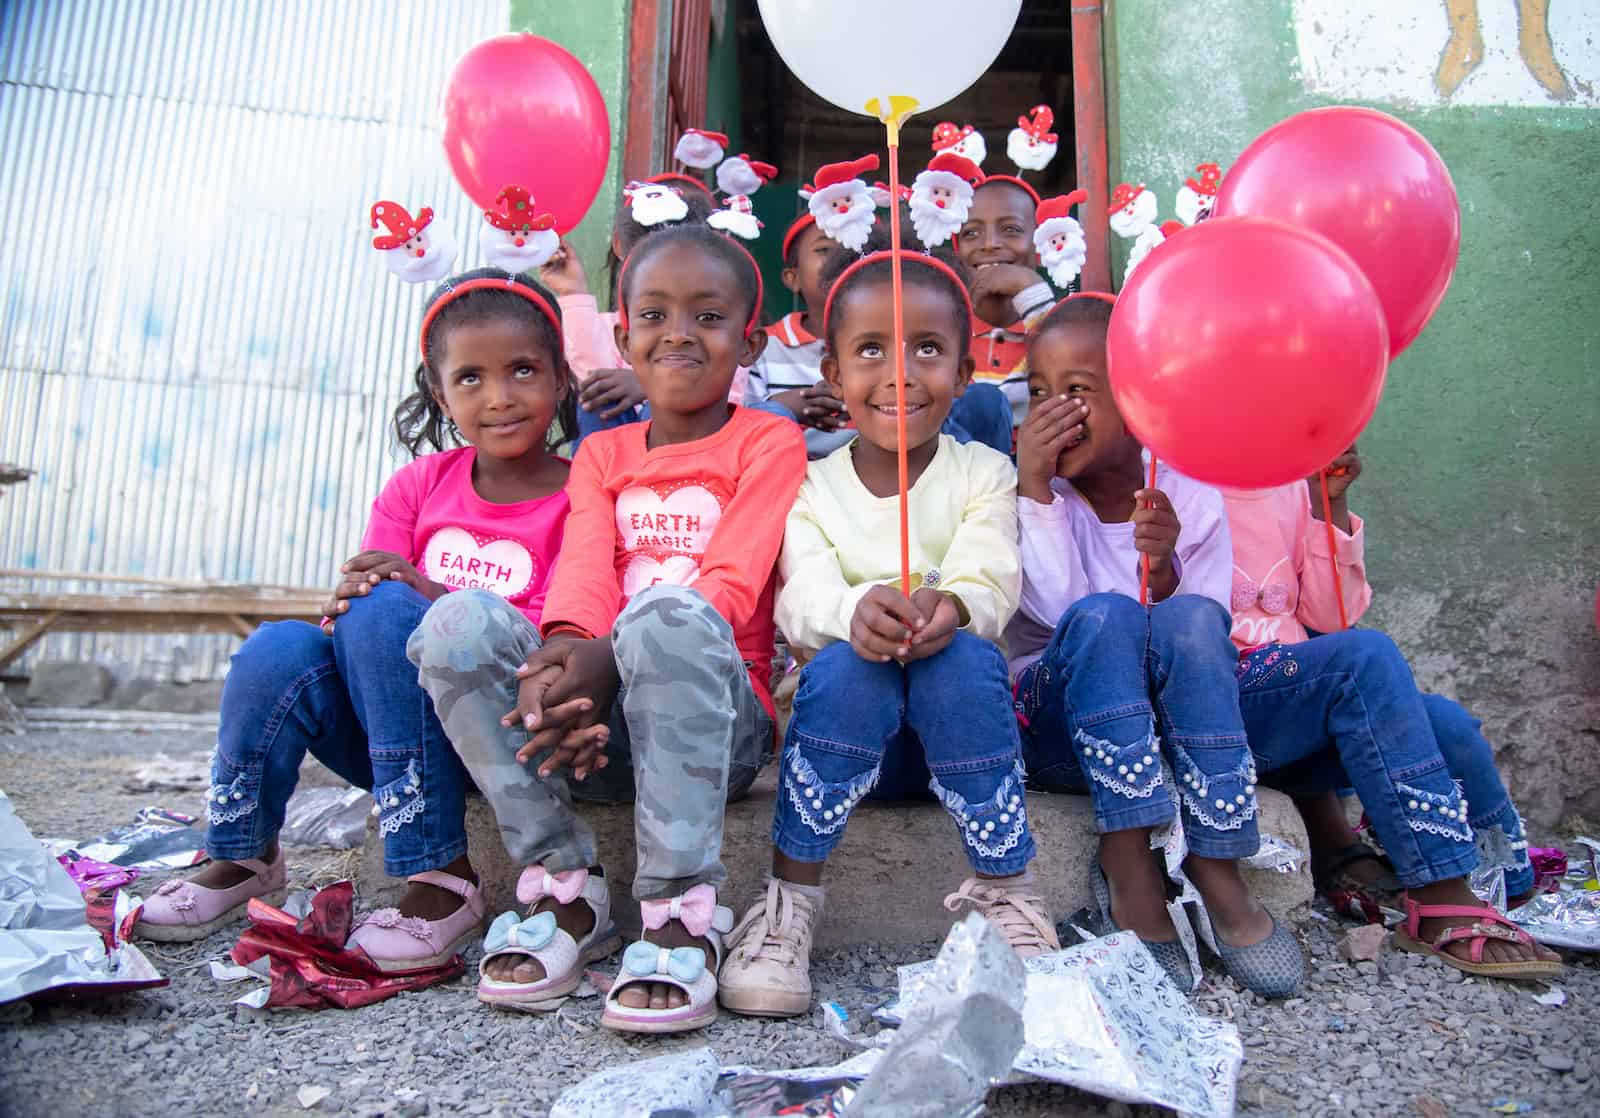 A group of children sit on a church stoop, holding balloons and wearing Santa Claus headbands.